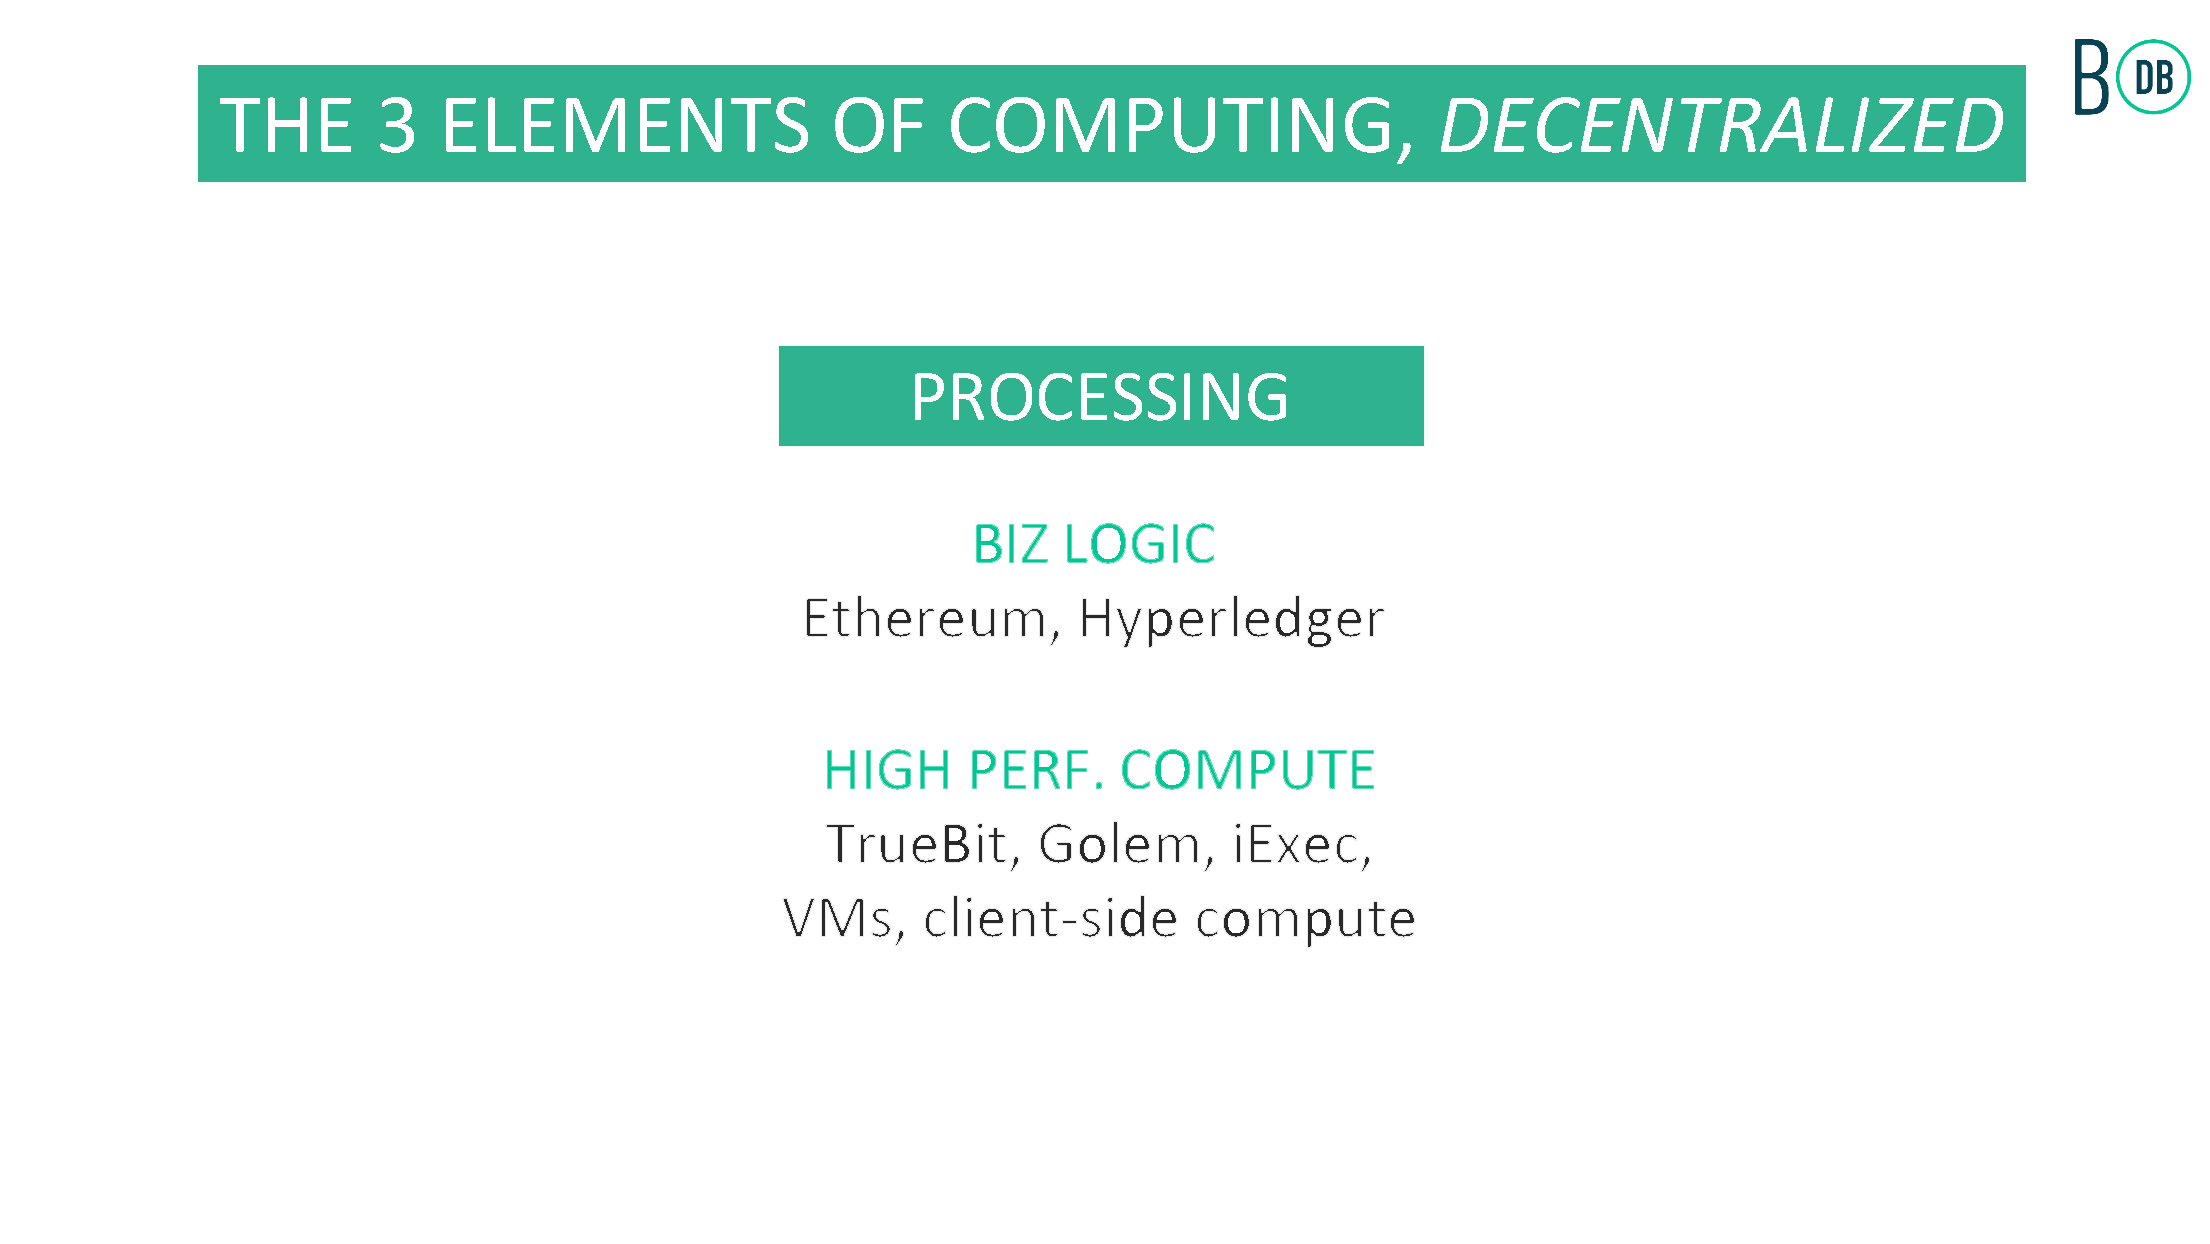 Decentralized processing